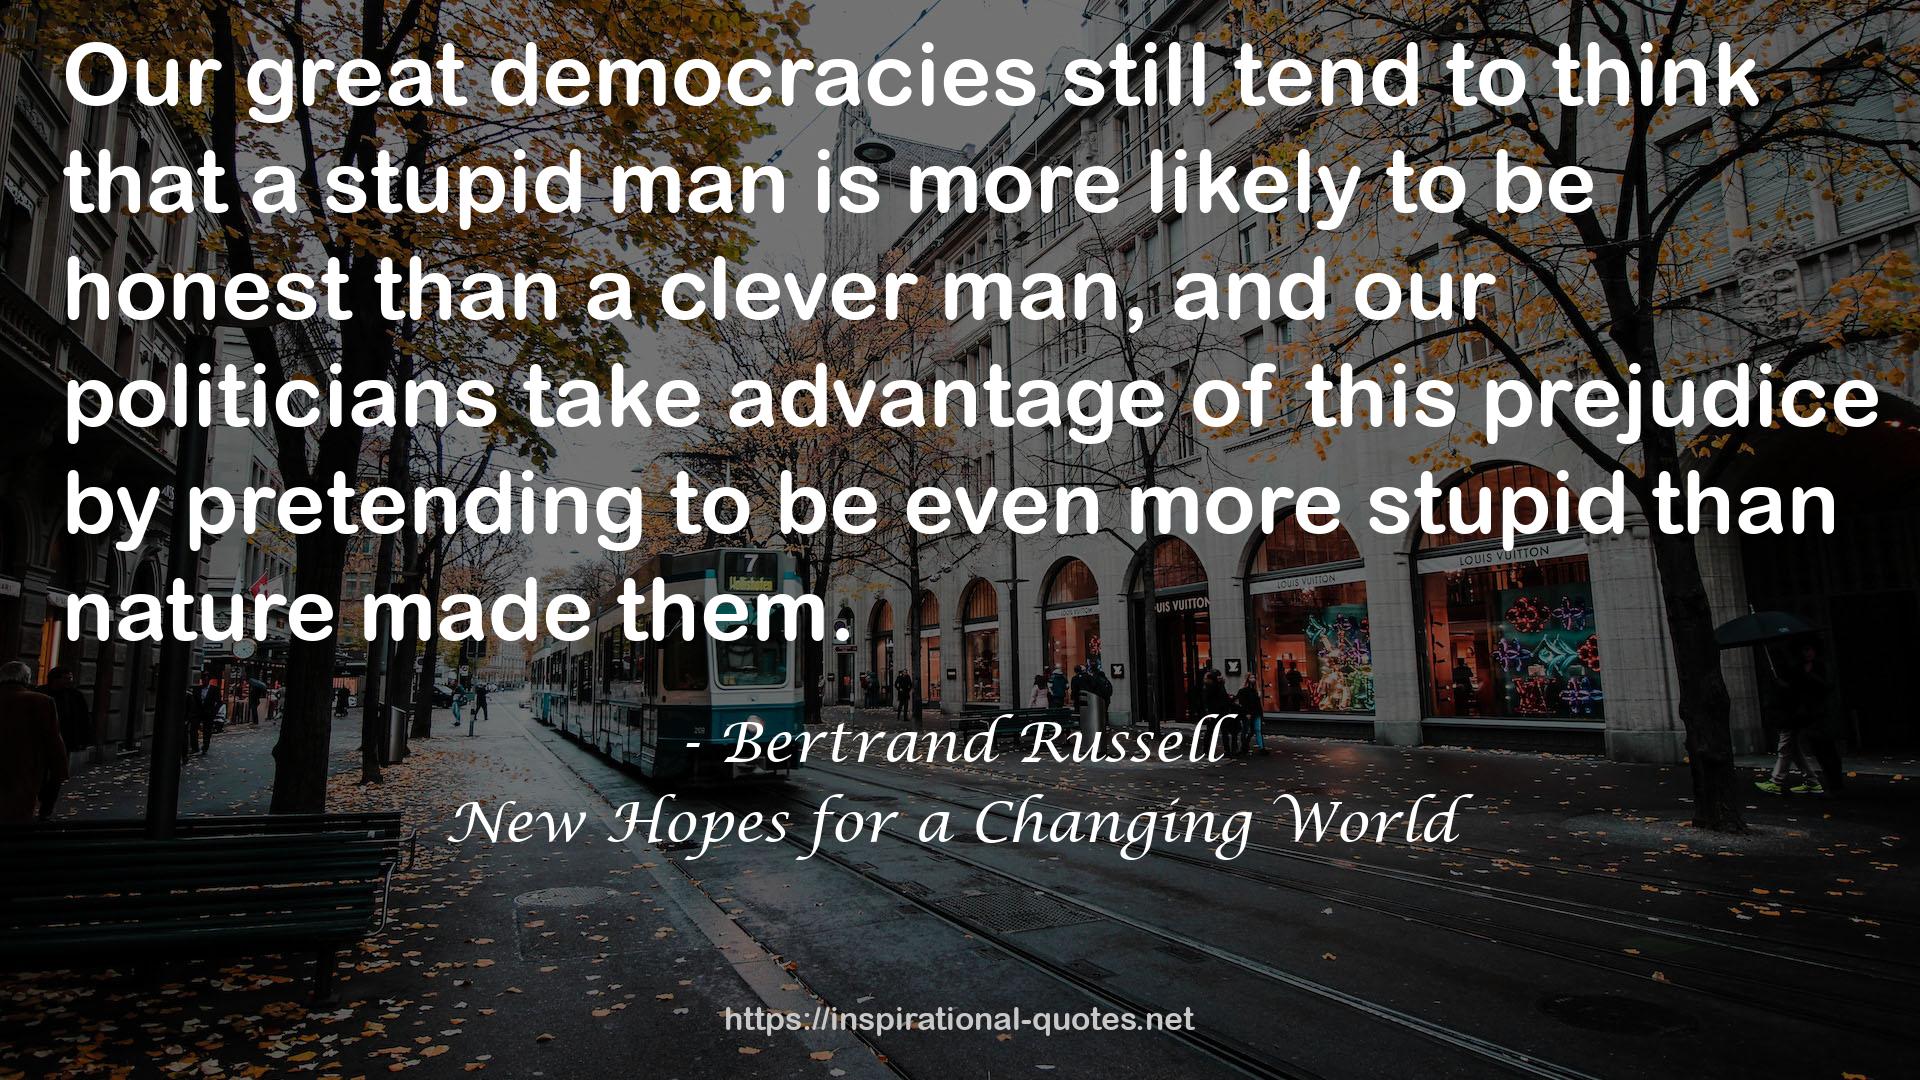 New Hopes for a Changing World QUOTES